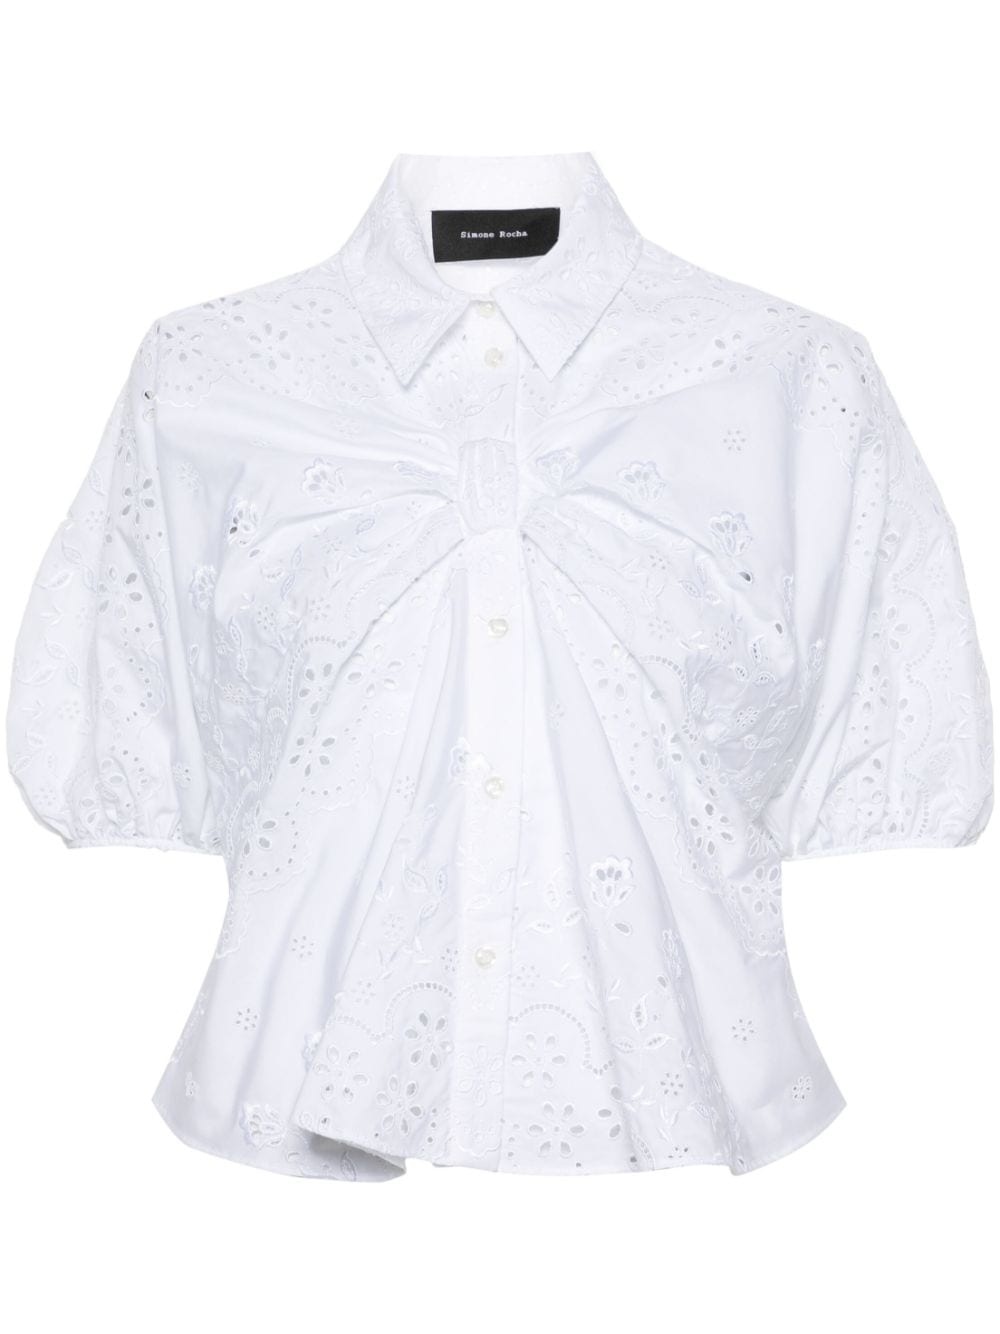 broderie anglaise cotton blouse - 1